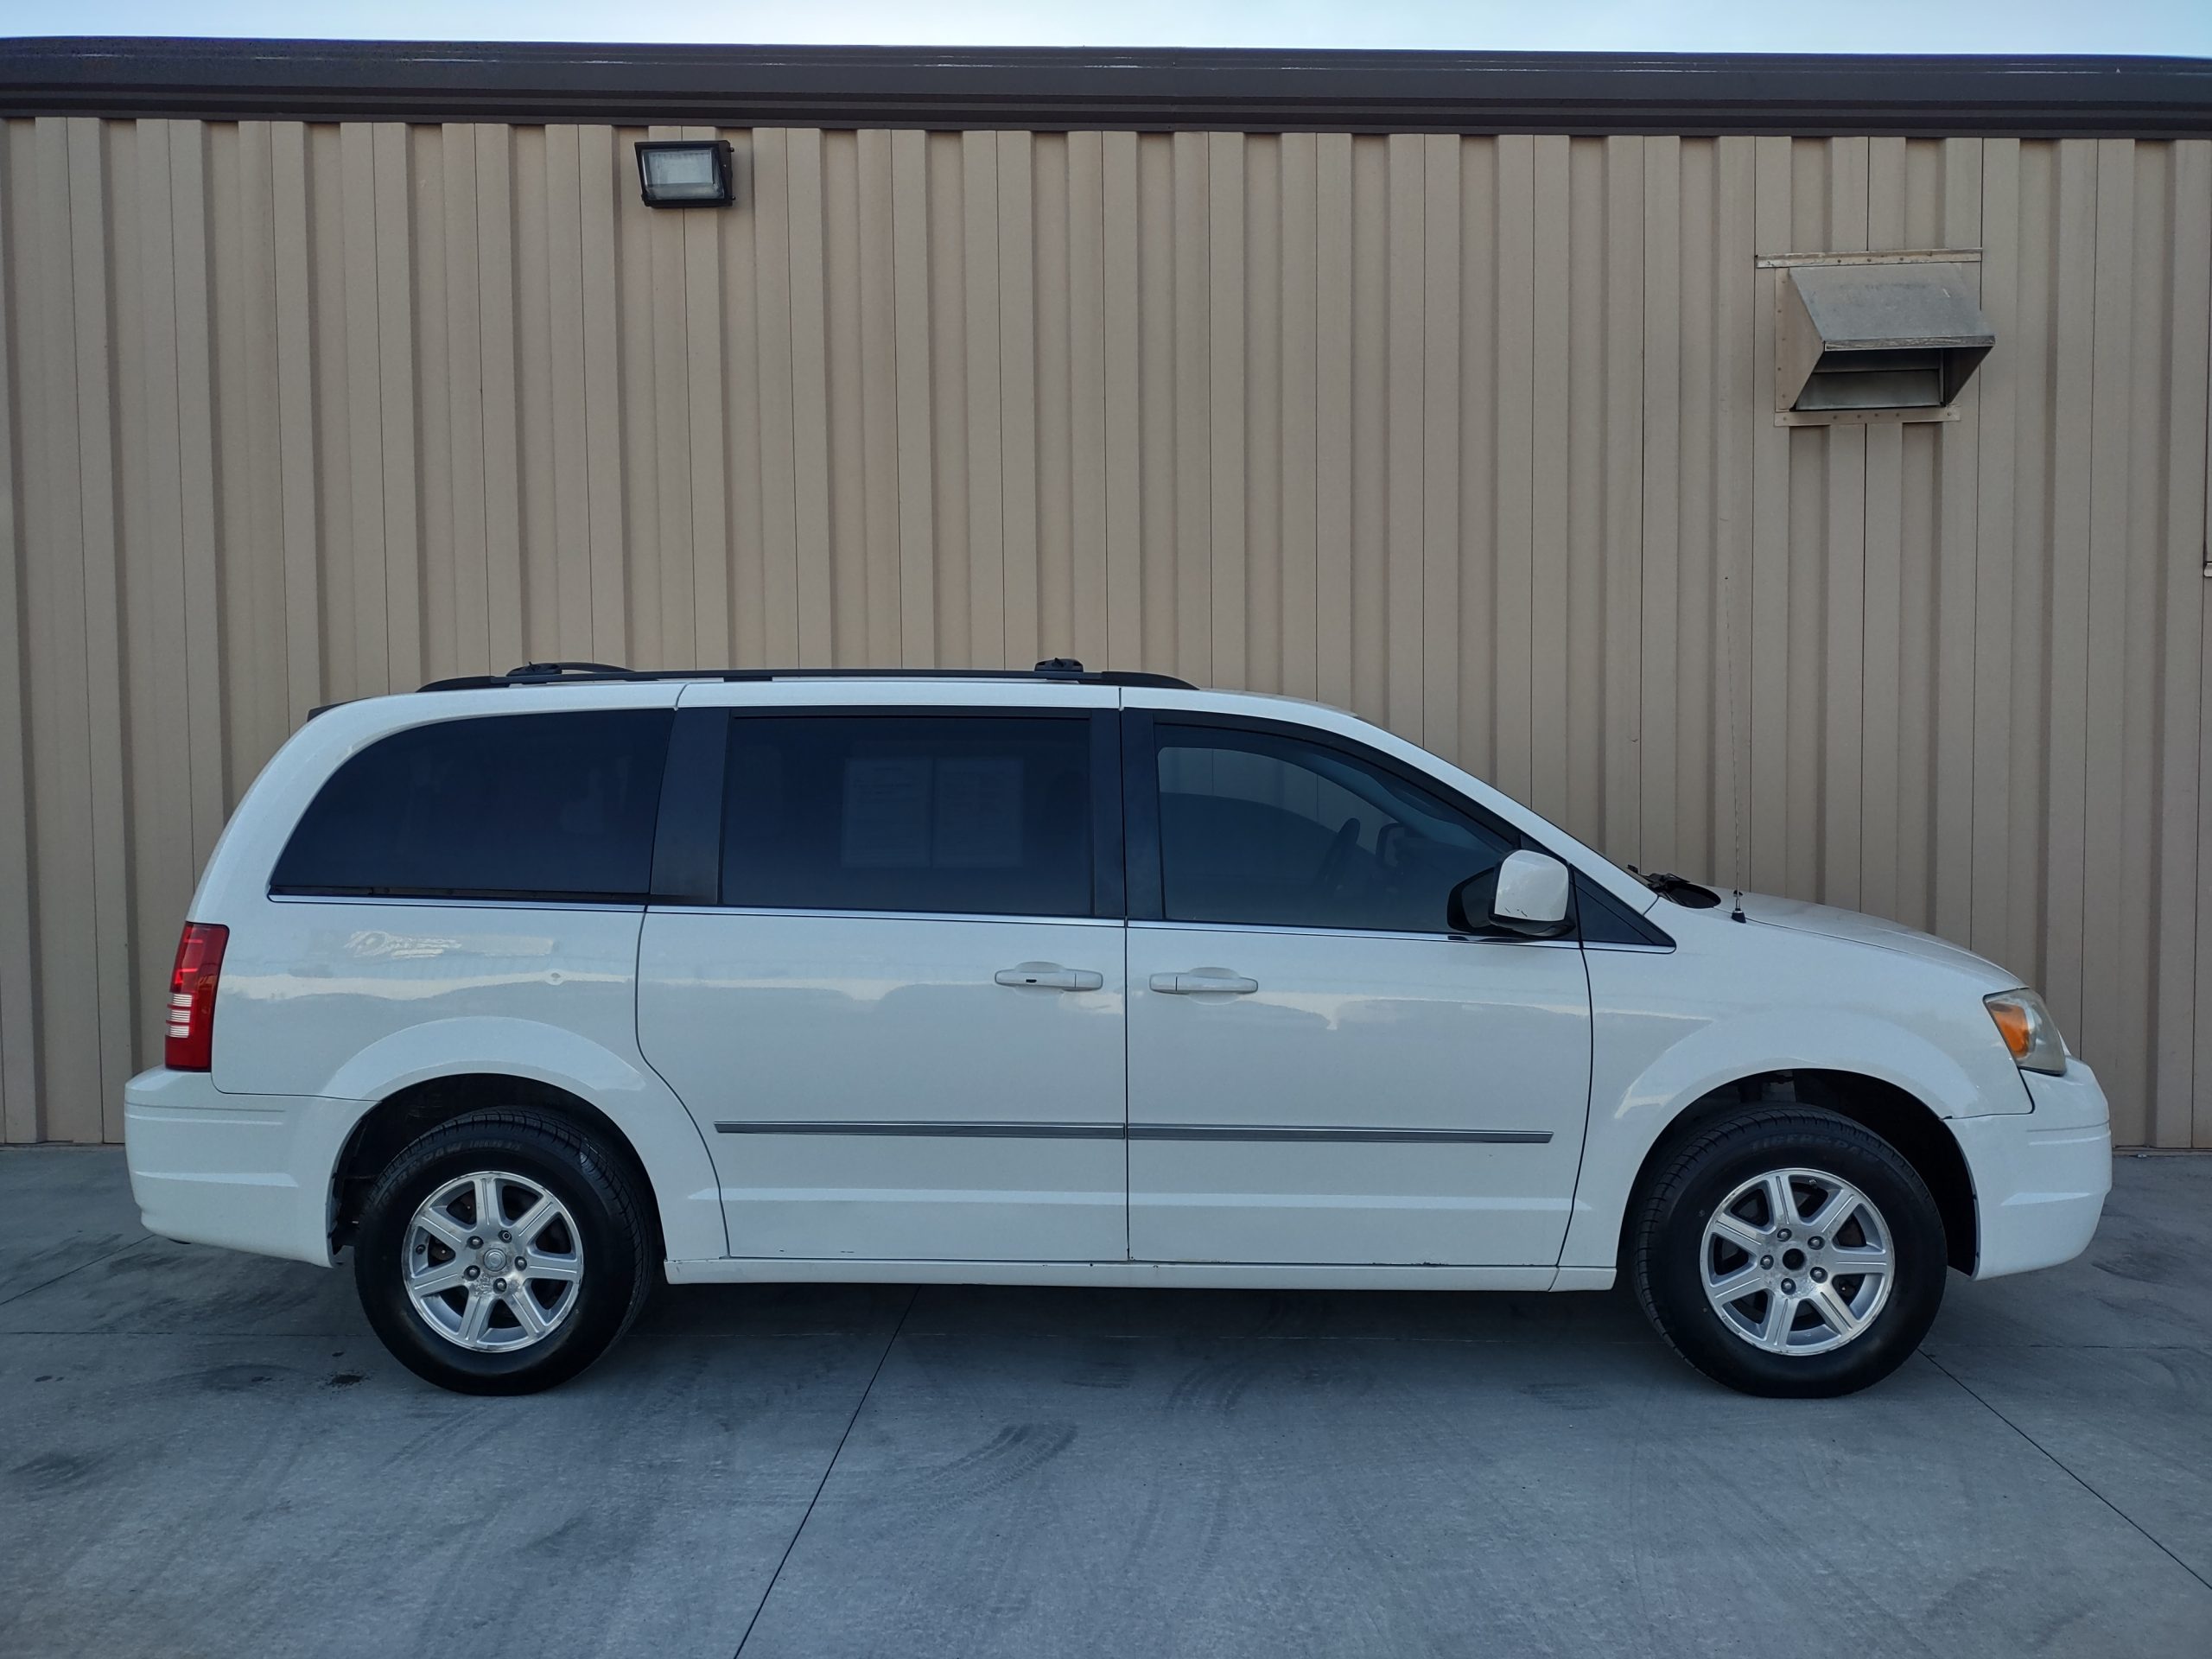 Used 2009 Chrysler Town & Country Touring Van for sale in 